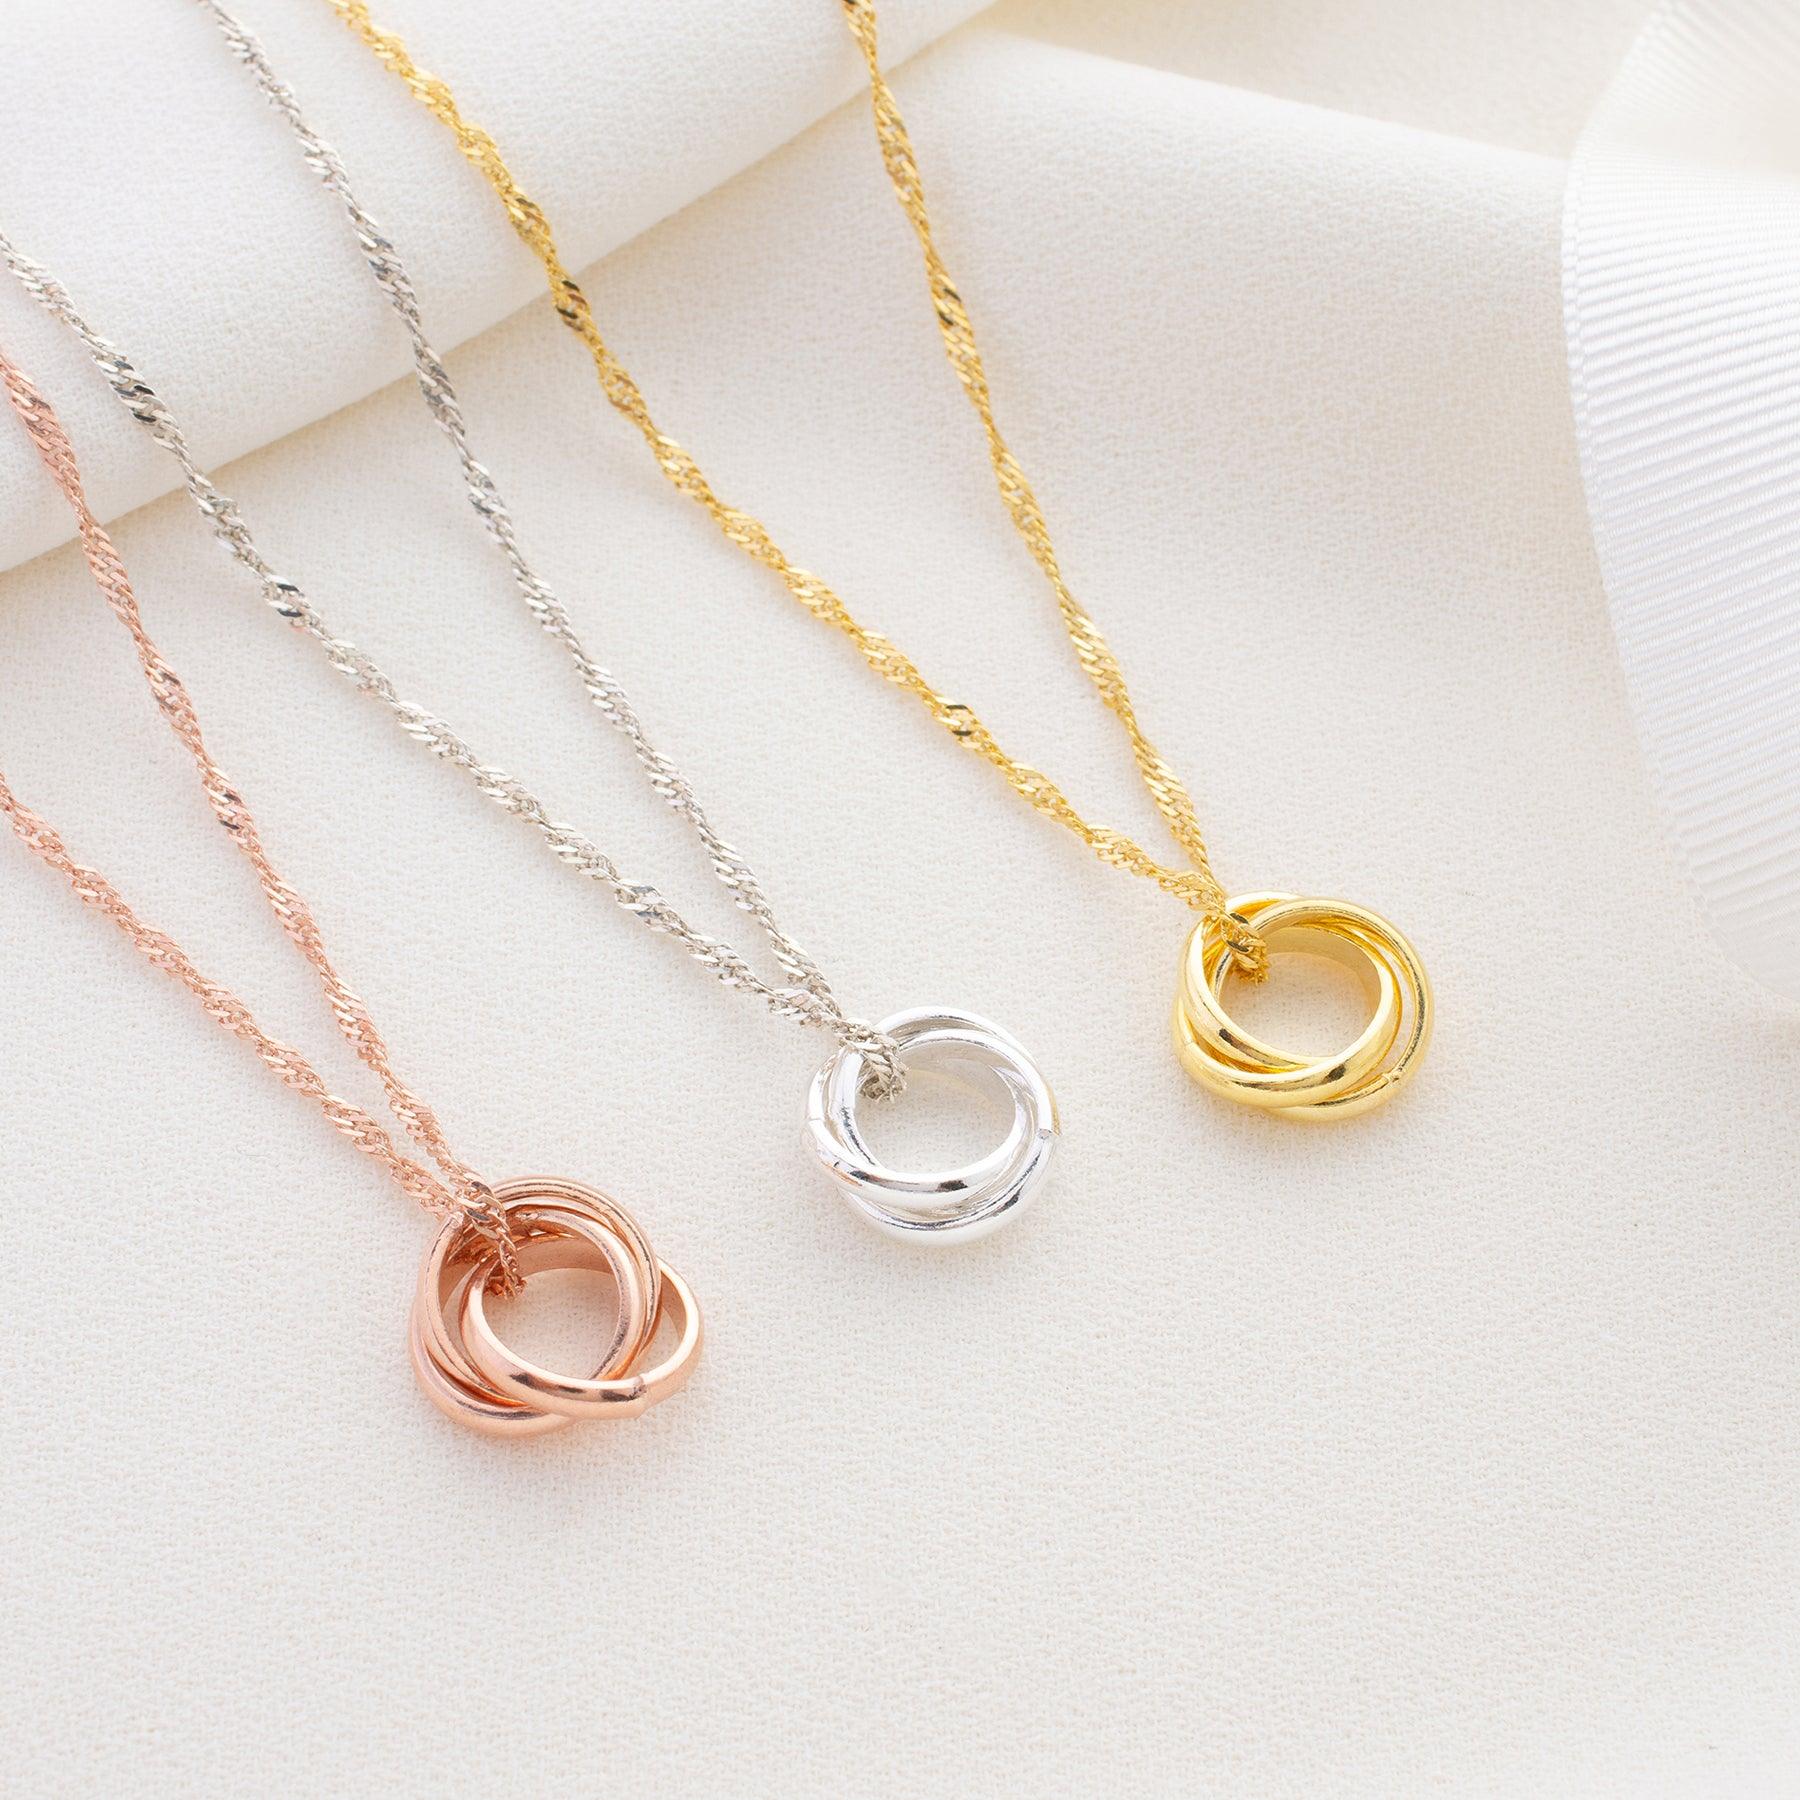 Interlocking Circles Singapore Necklace • Russian Ring Necklace - Trending Silver Gifts